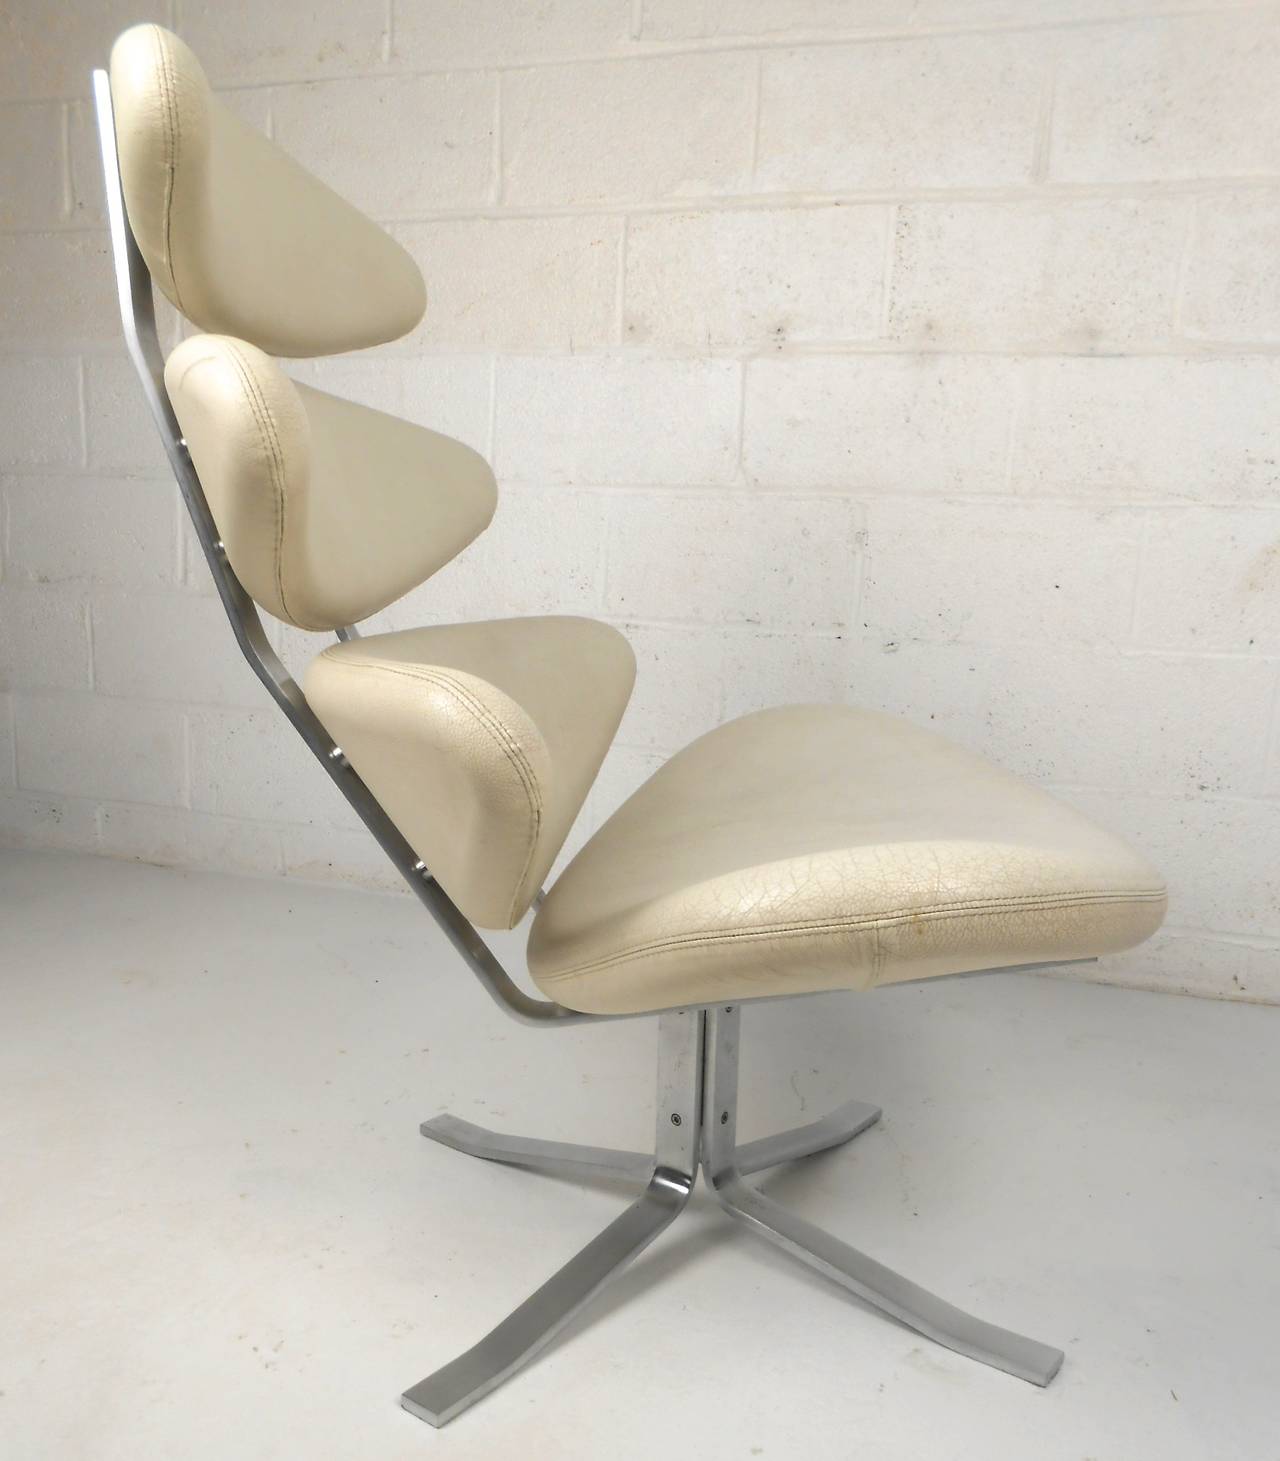 This beautifully designed vintage chair features wonderfully aged leather and the perfect mix of style and comfort. Unique design attributed to Poul Volther, swivel seat and high back make this a comfortable addition to any interior. Please confirm